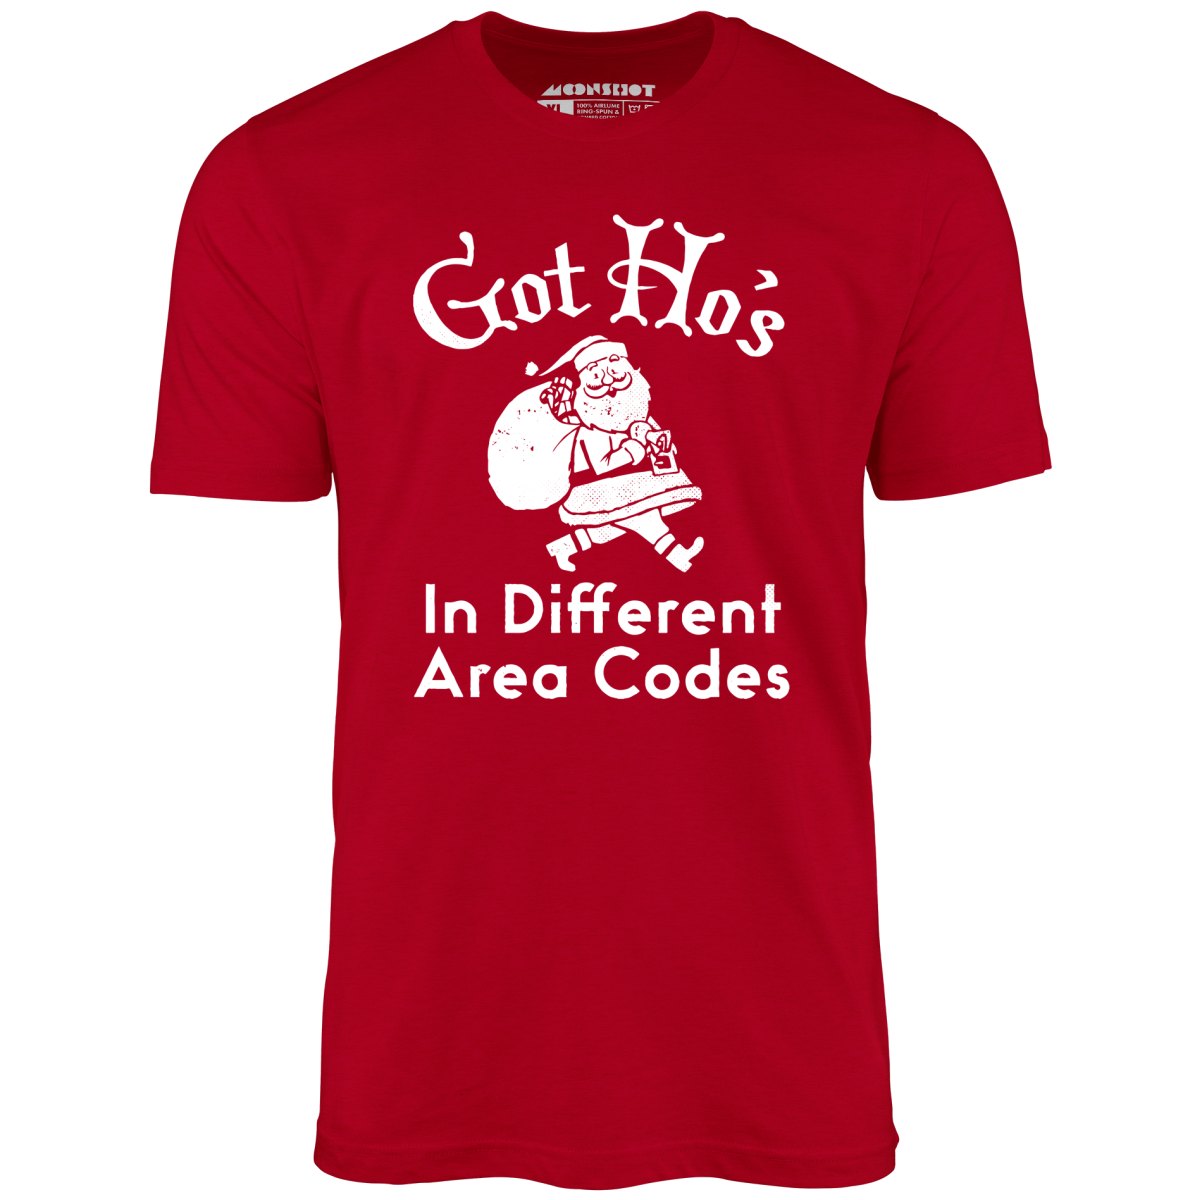 Got Ho's in Different Area Codes - Unisex T-Shirt